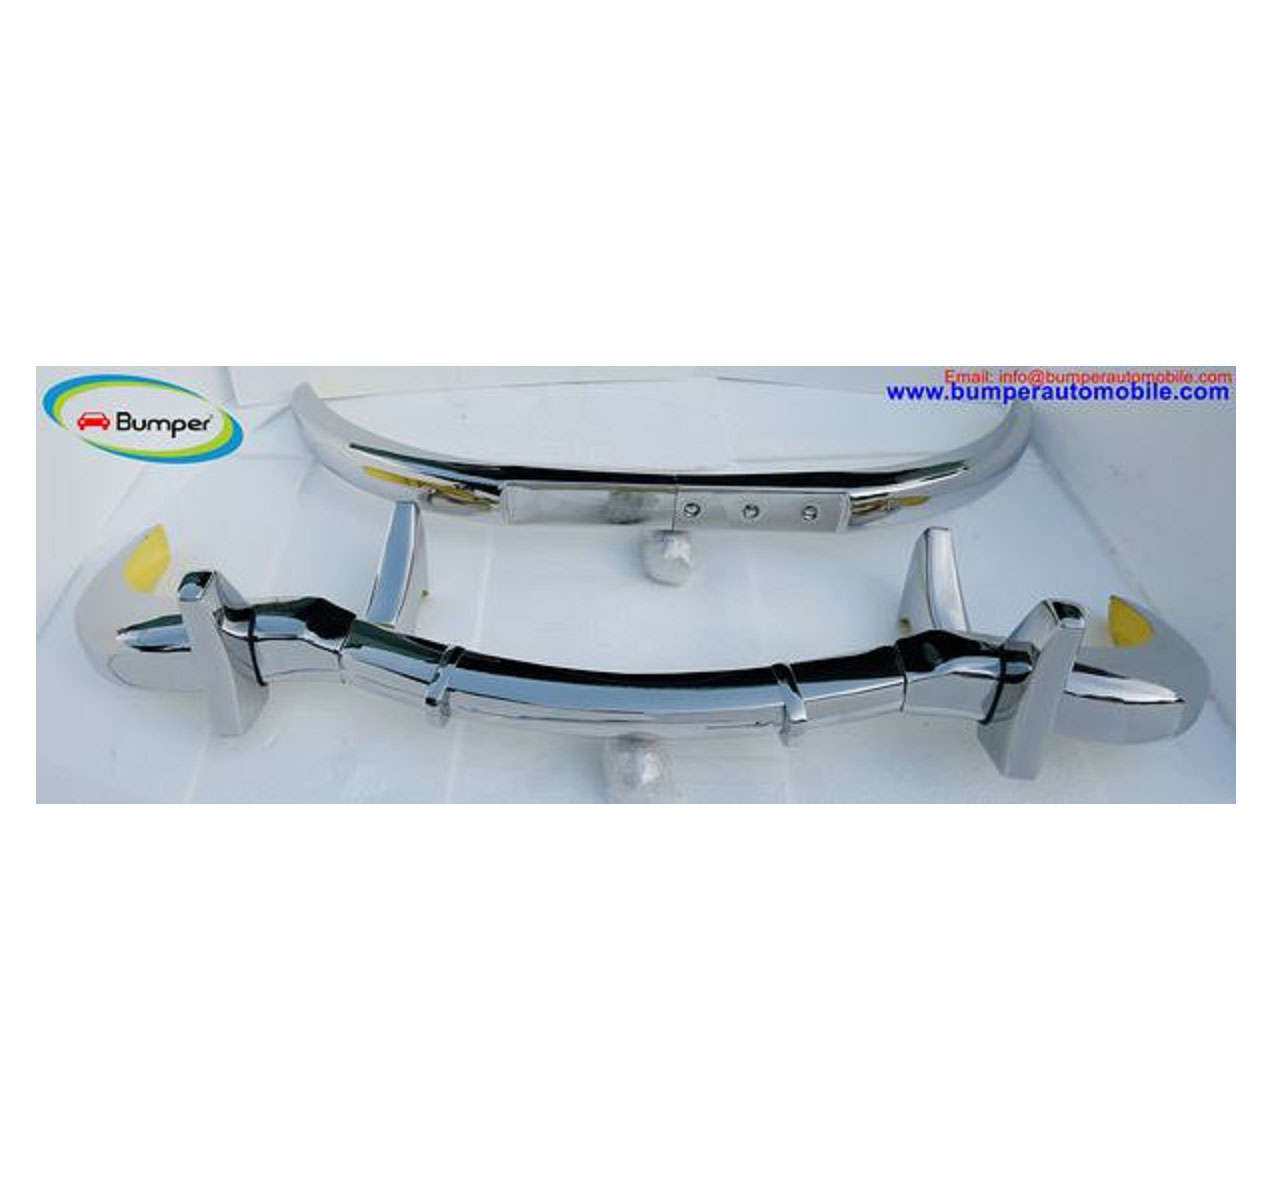 13.Mercedes 300SL gullwinged coupe bumper (1954-1957) (4)